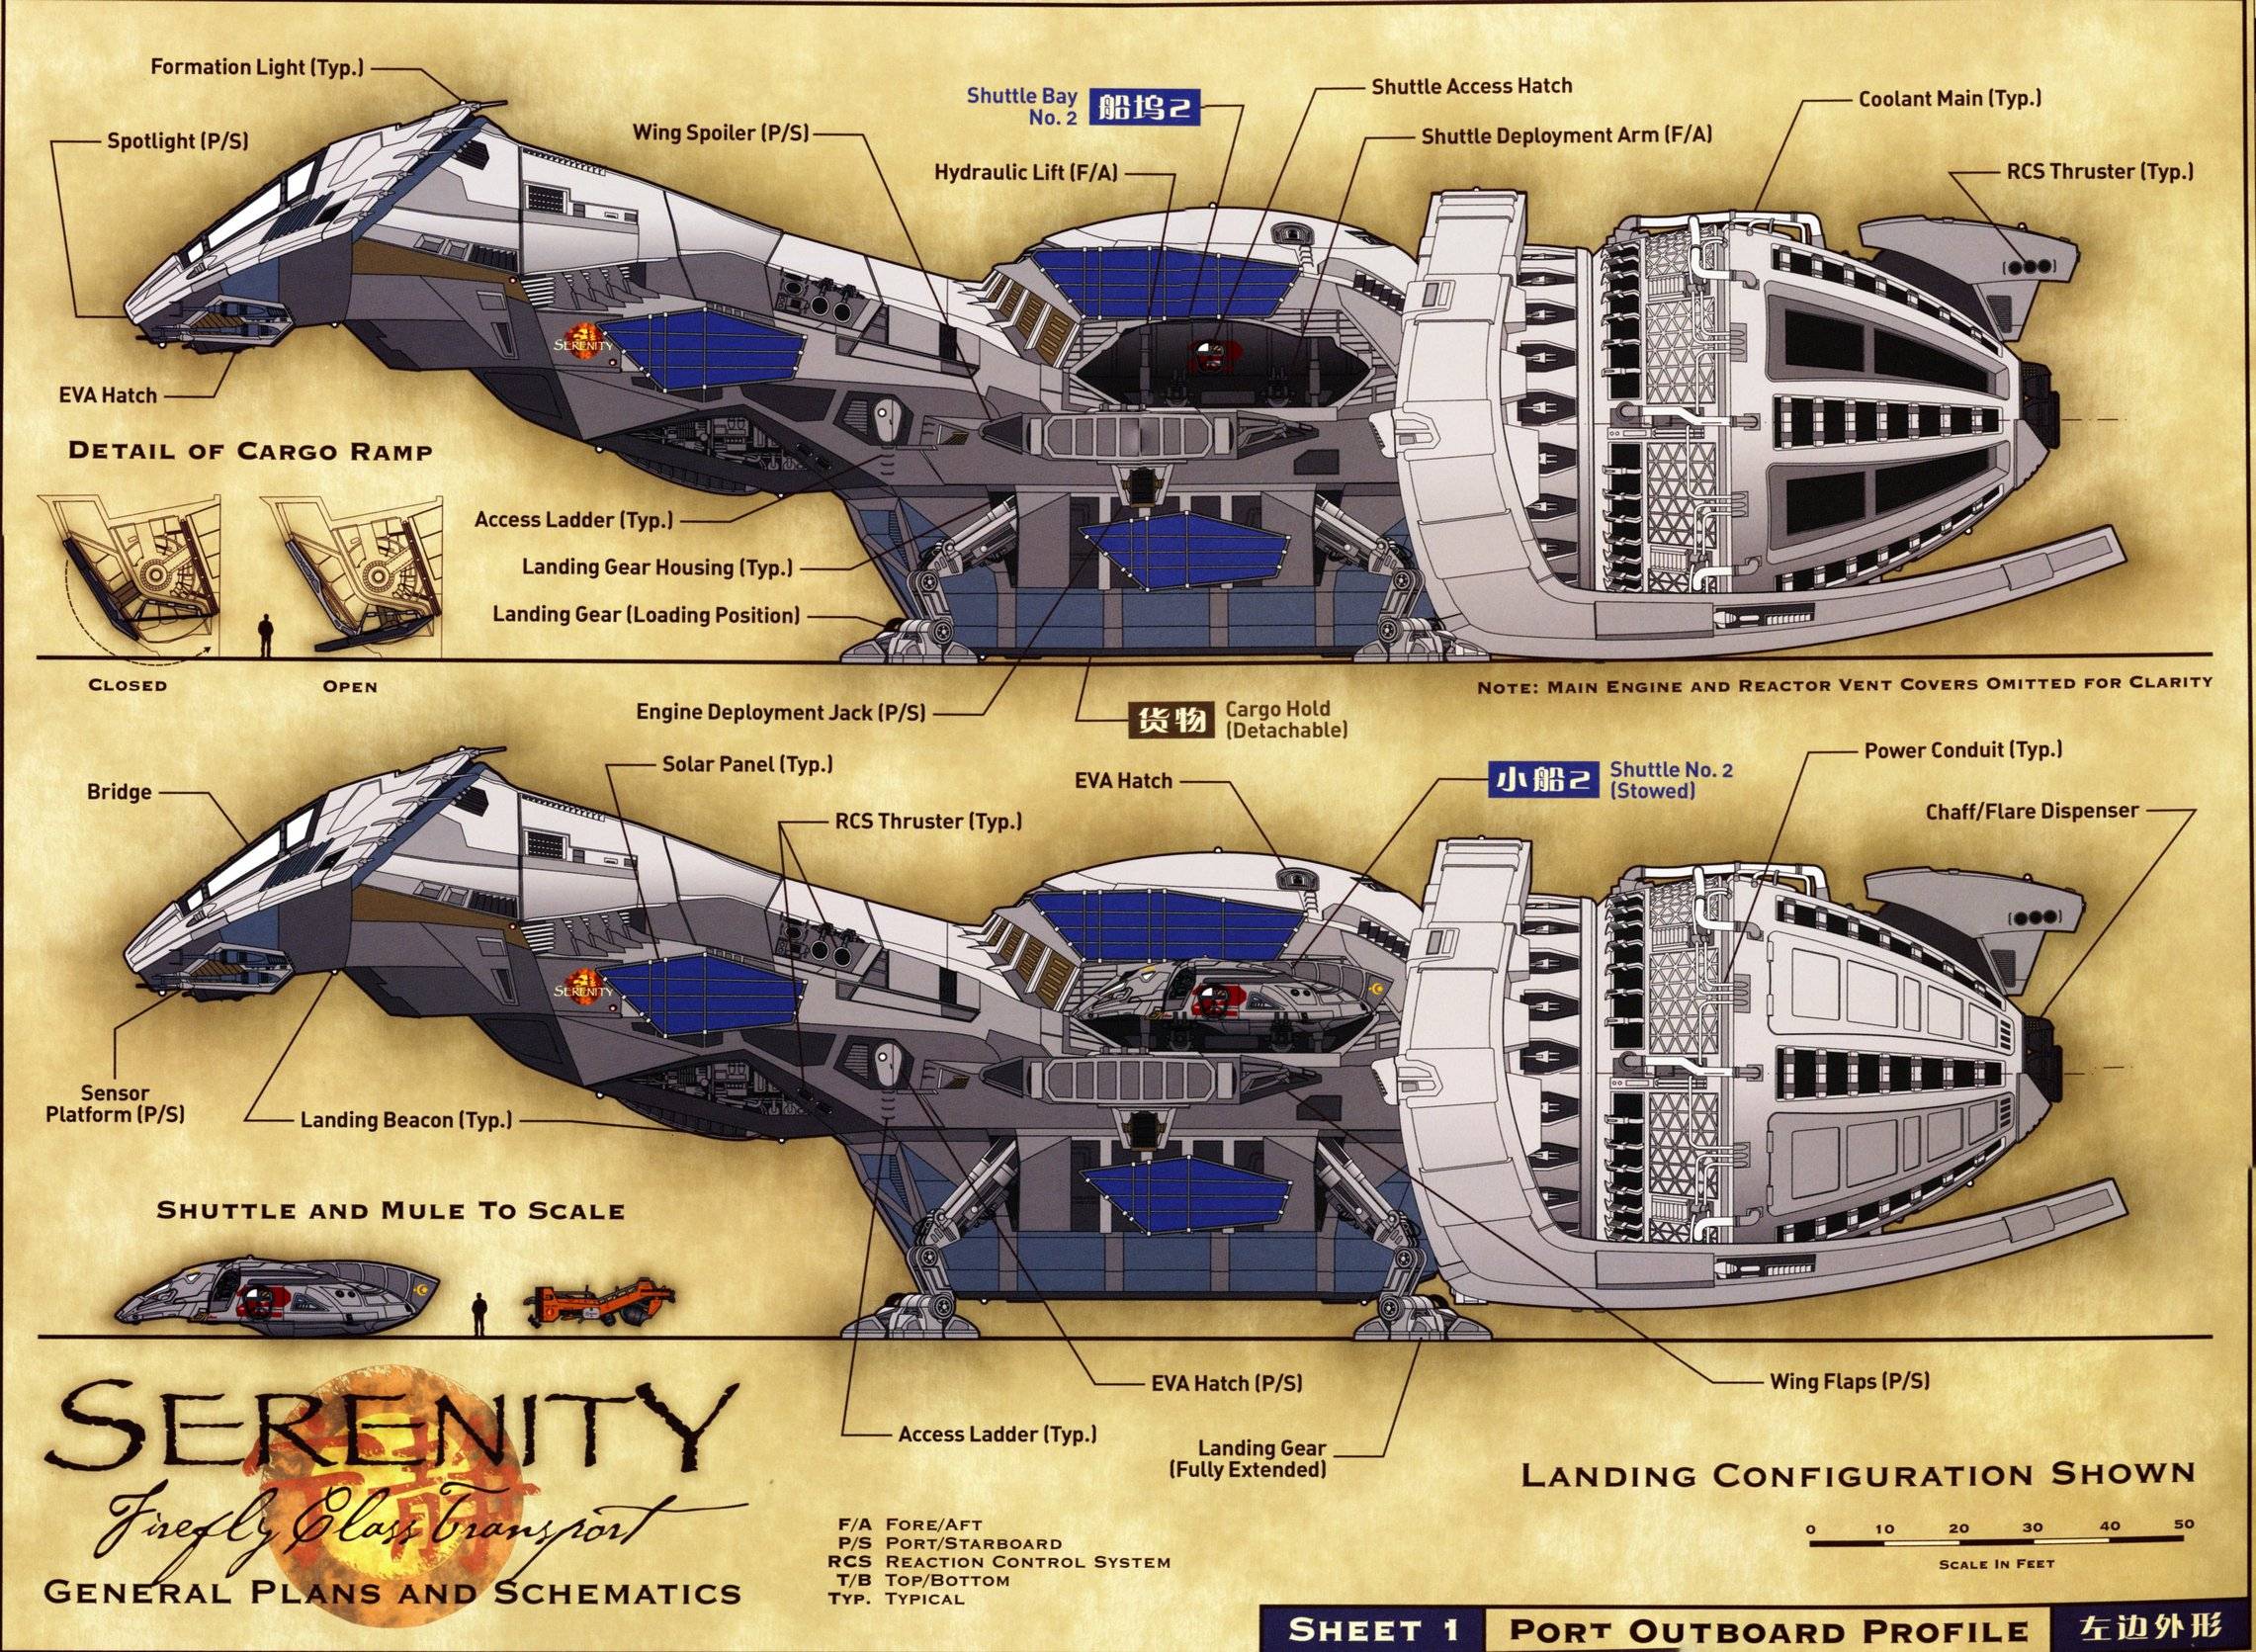 Awesome Firefly schematic wallpaper. [2282x1671]